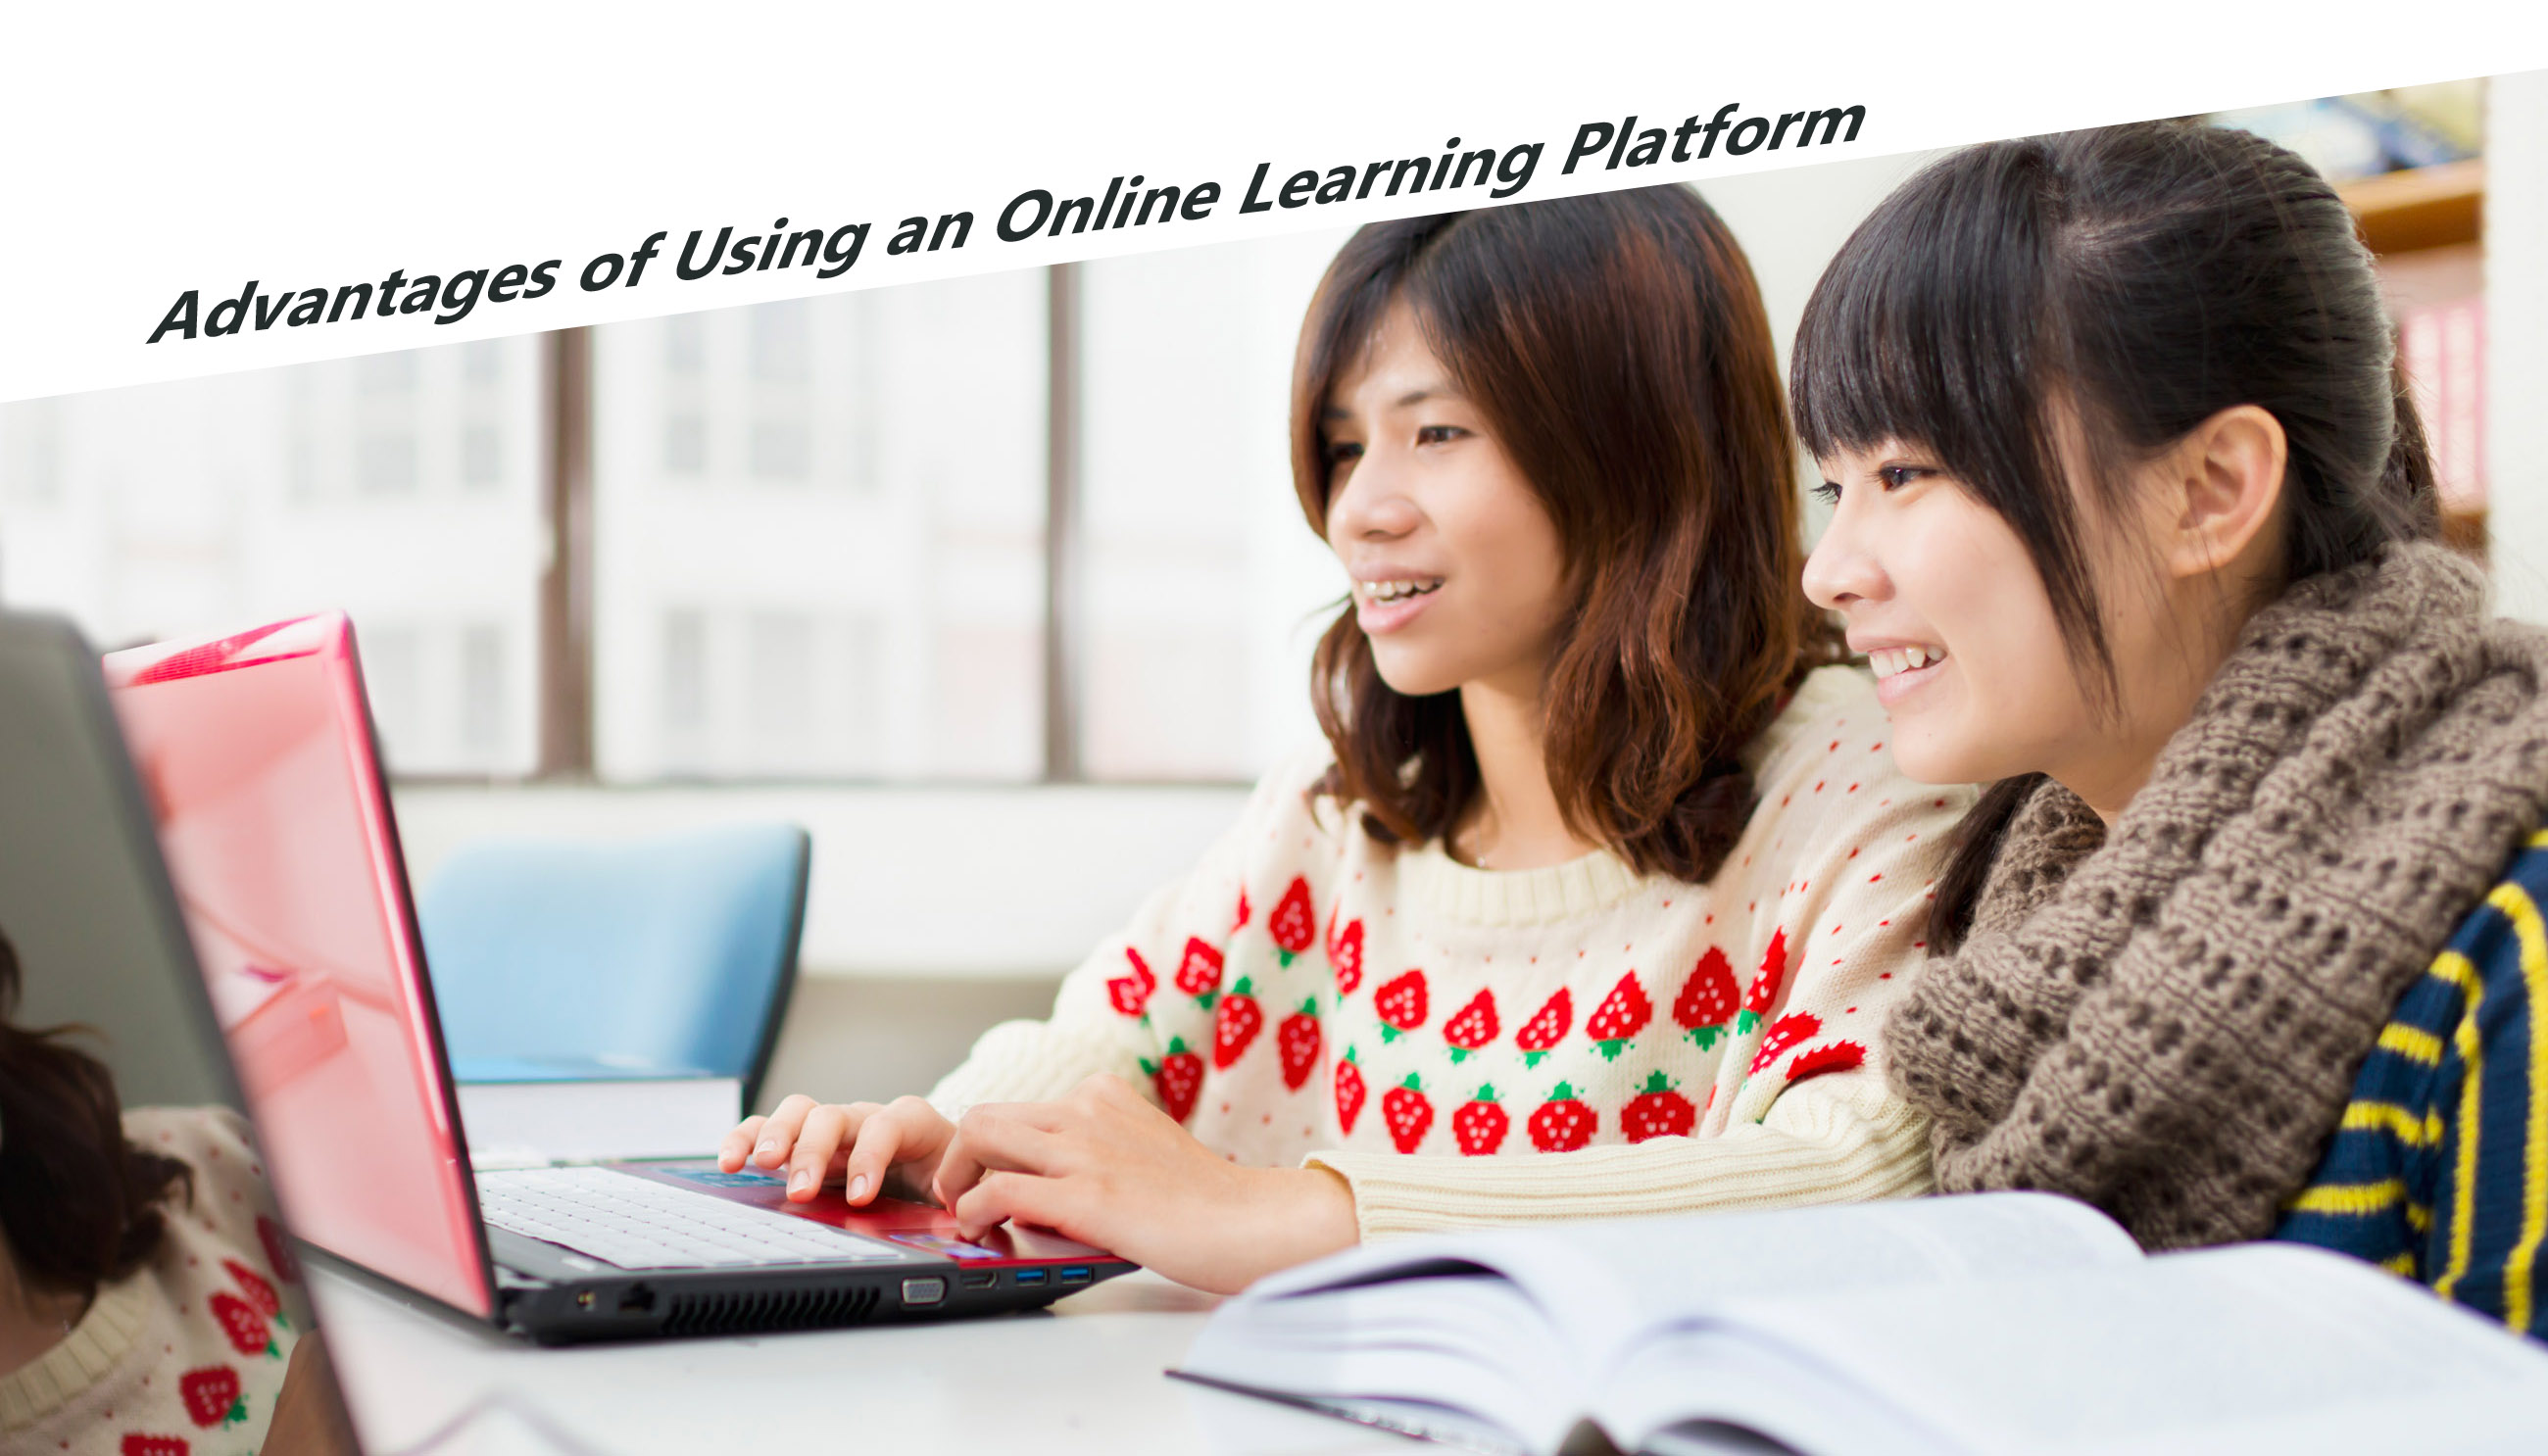 Advantages of Using an Online Learning Platform